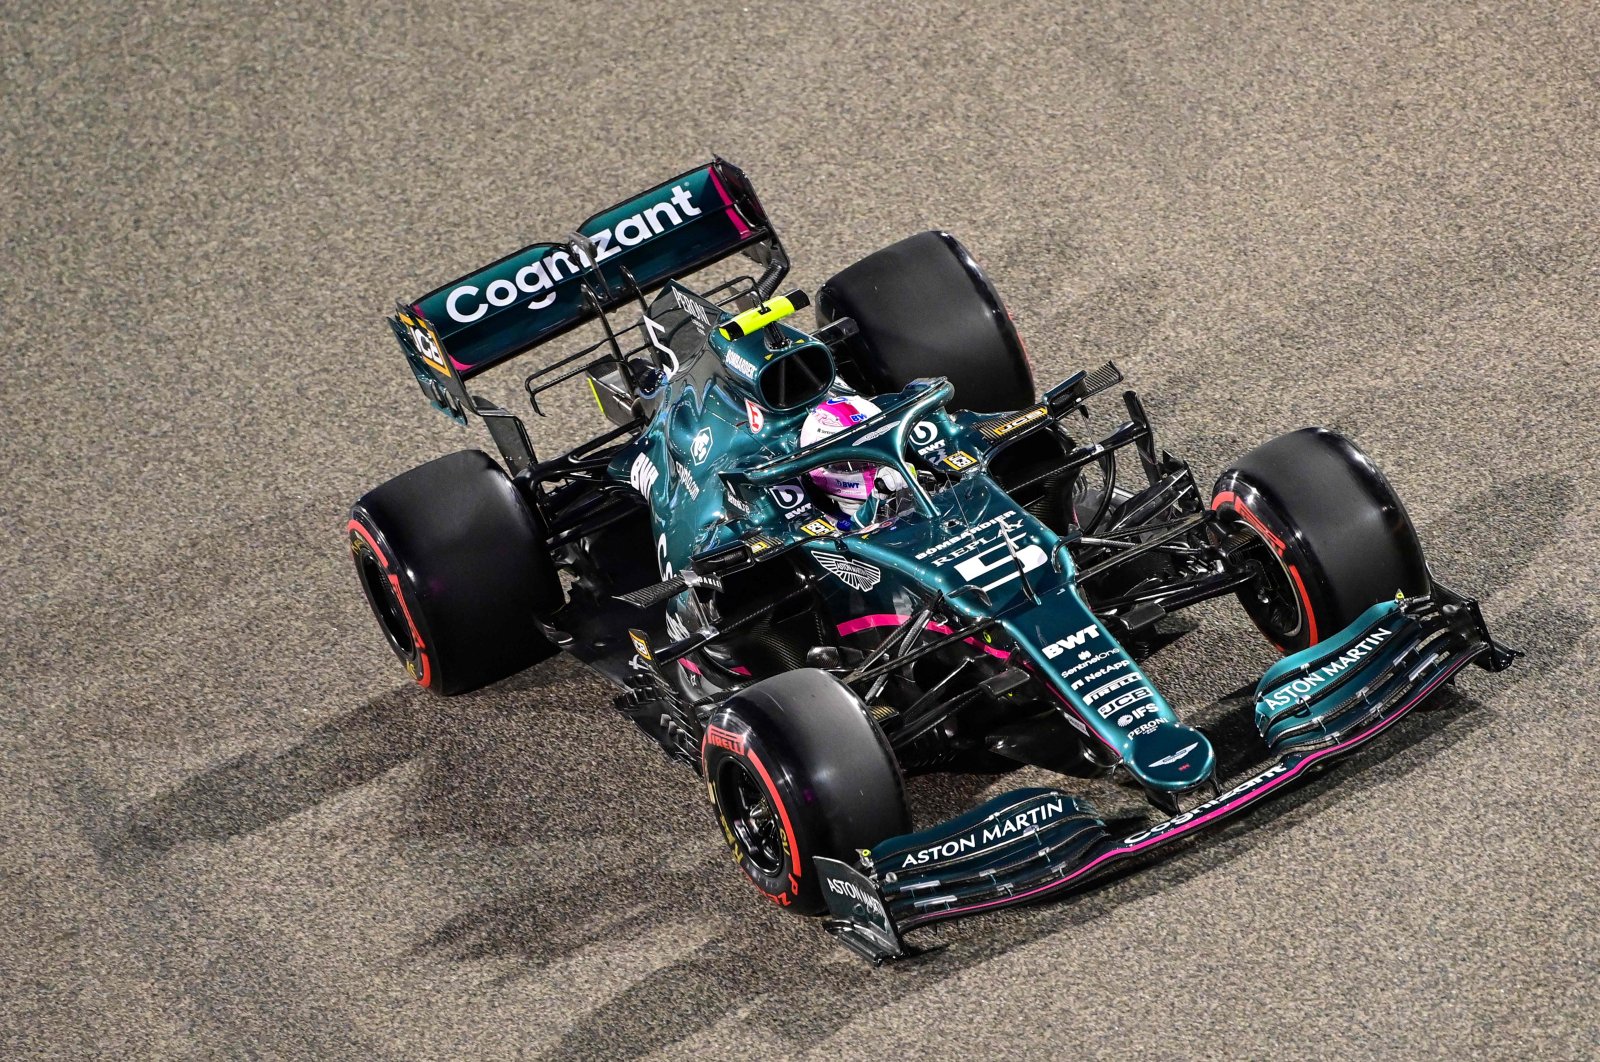 Aston Martin's German driver Sebastian Vettel drives during the qualifying session on the eve of the Bahrain Formula One Grand Prix, Sakhir, Bahrain, March 27, 2021. (AFP Photo)